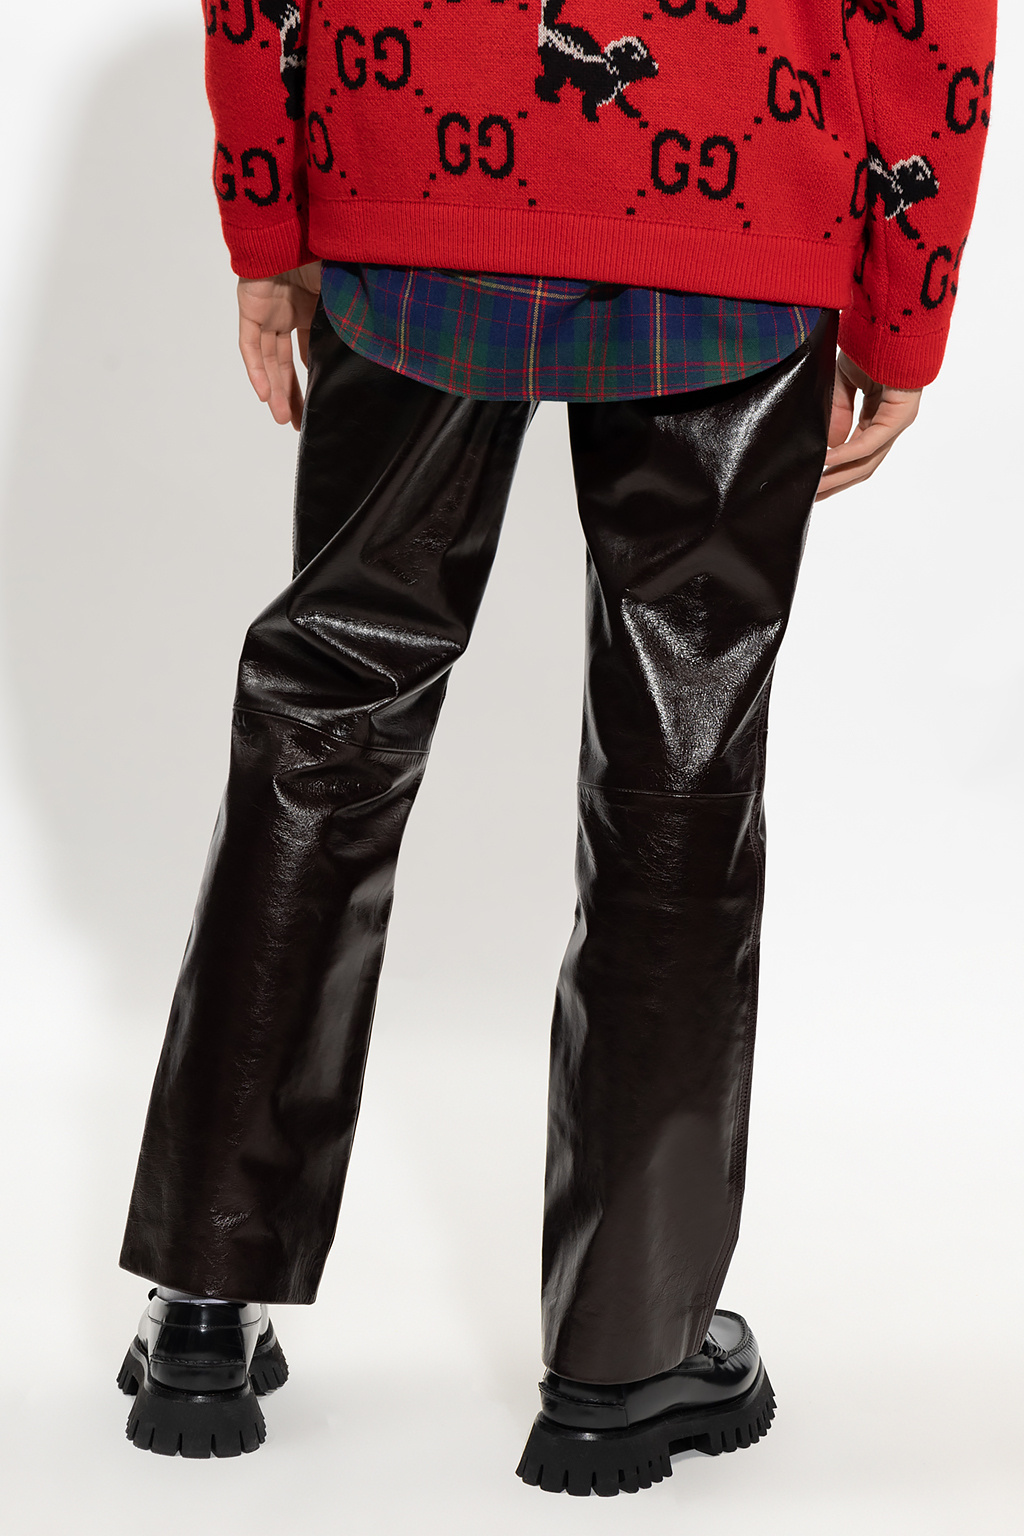 Mens Sexy Red Leather Trousers for Mens custom made order